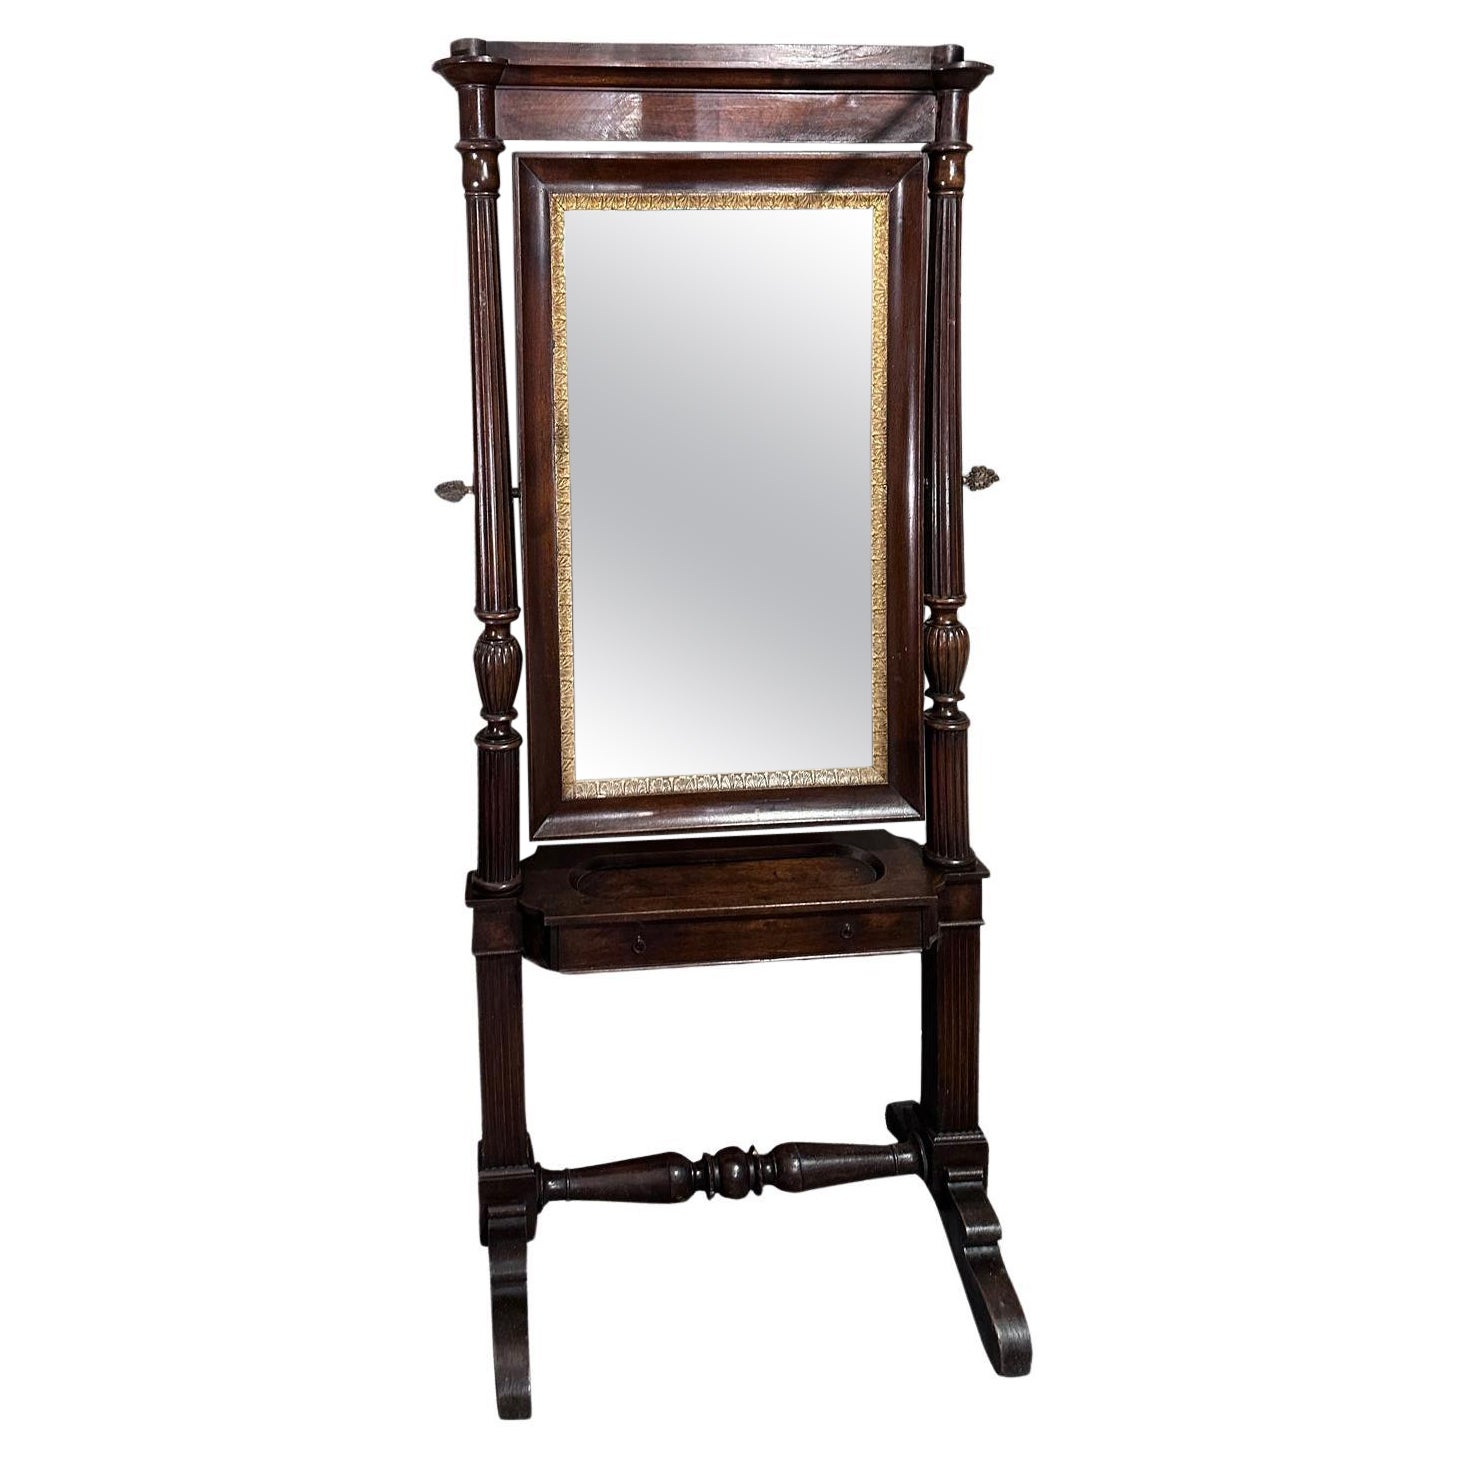 EARLY 19th CENTURY PSYCHE FLOOR MIRROR IN WALNUT For Sale